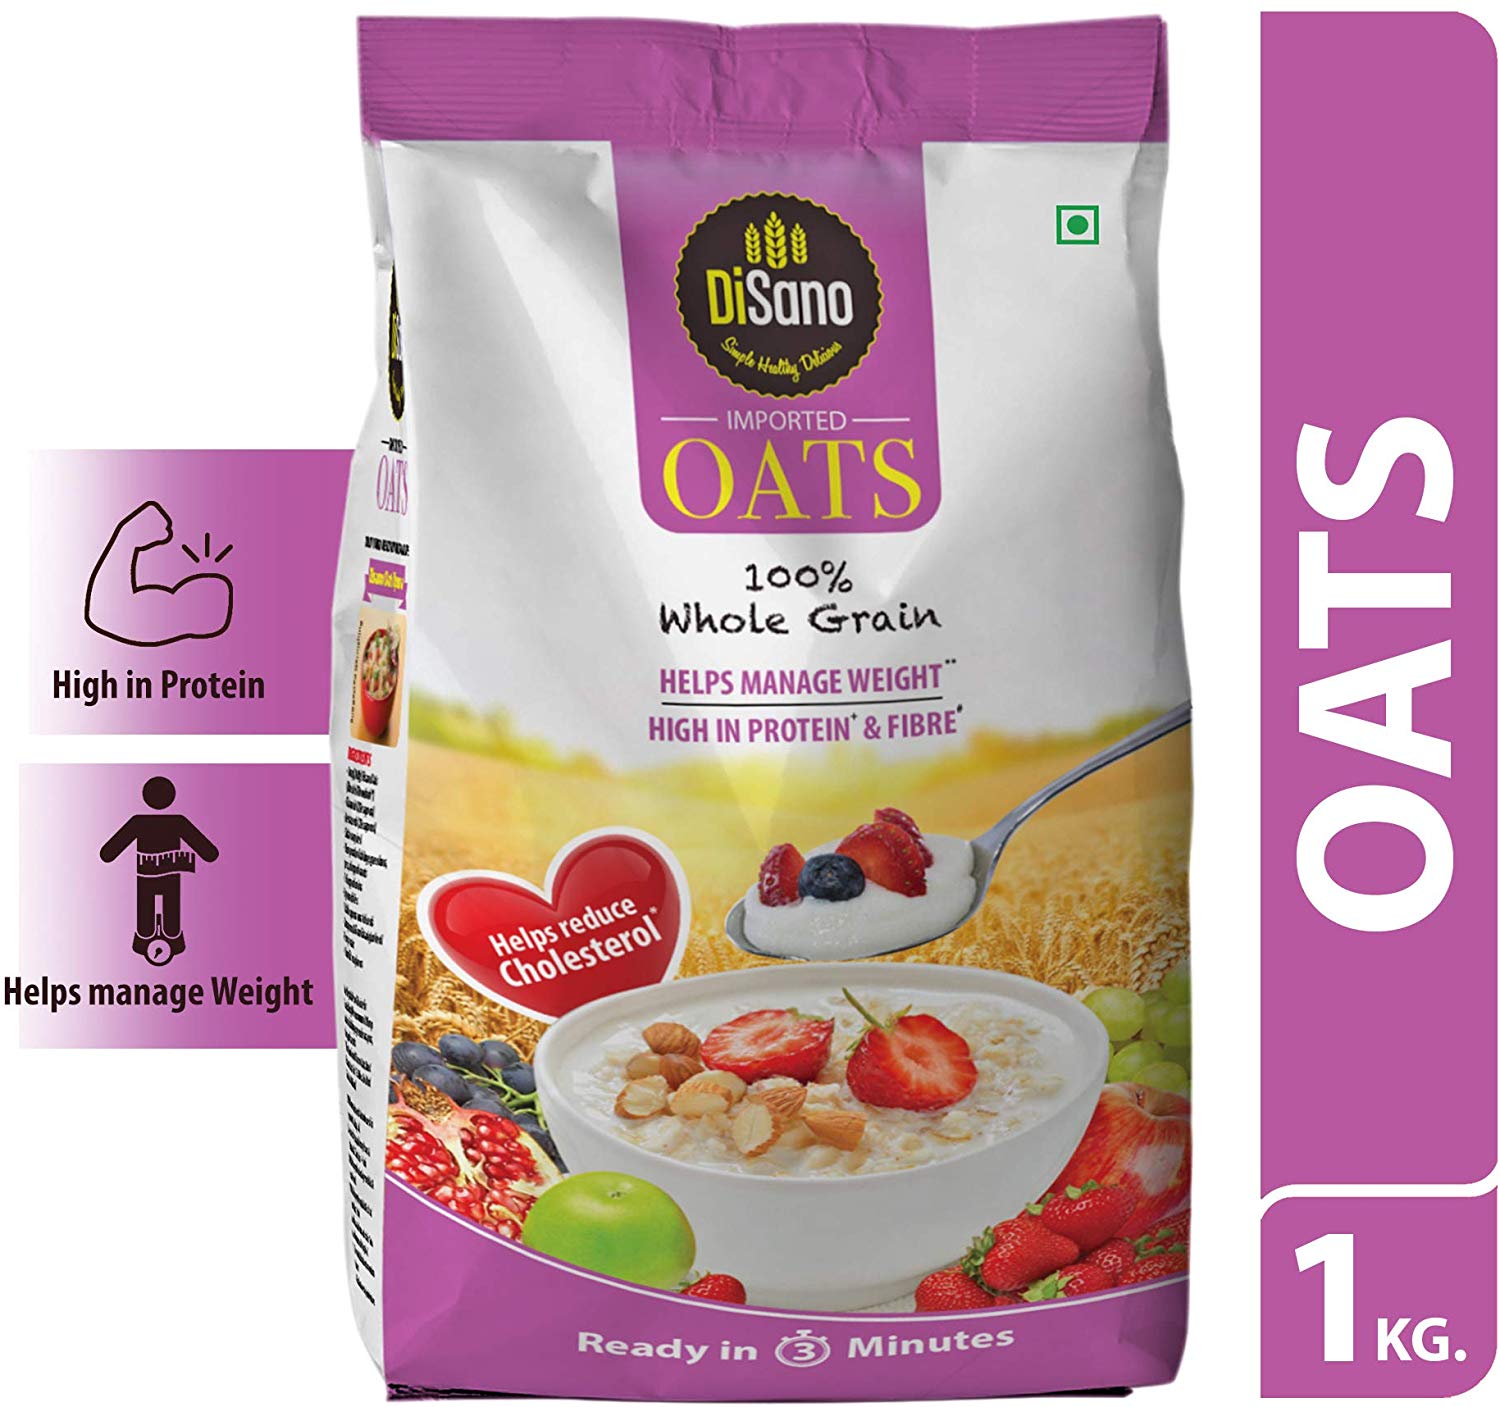 Disano Oats with High in Protein and Fibre Pouch, 2 kg